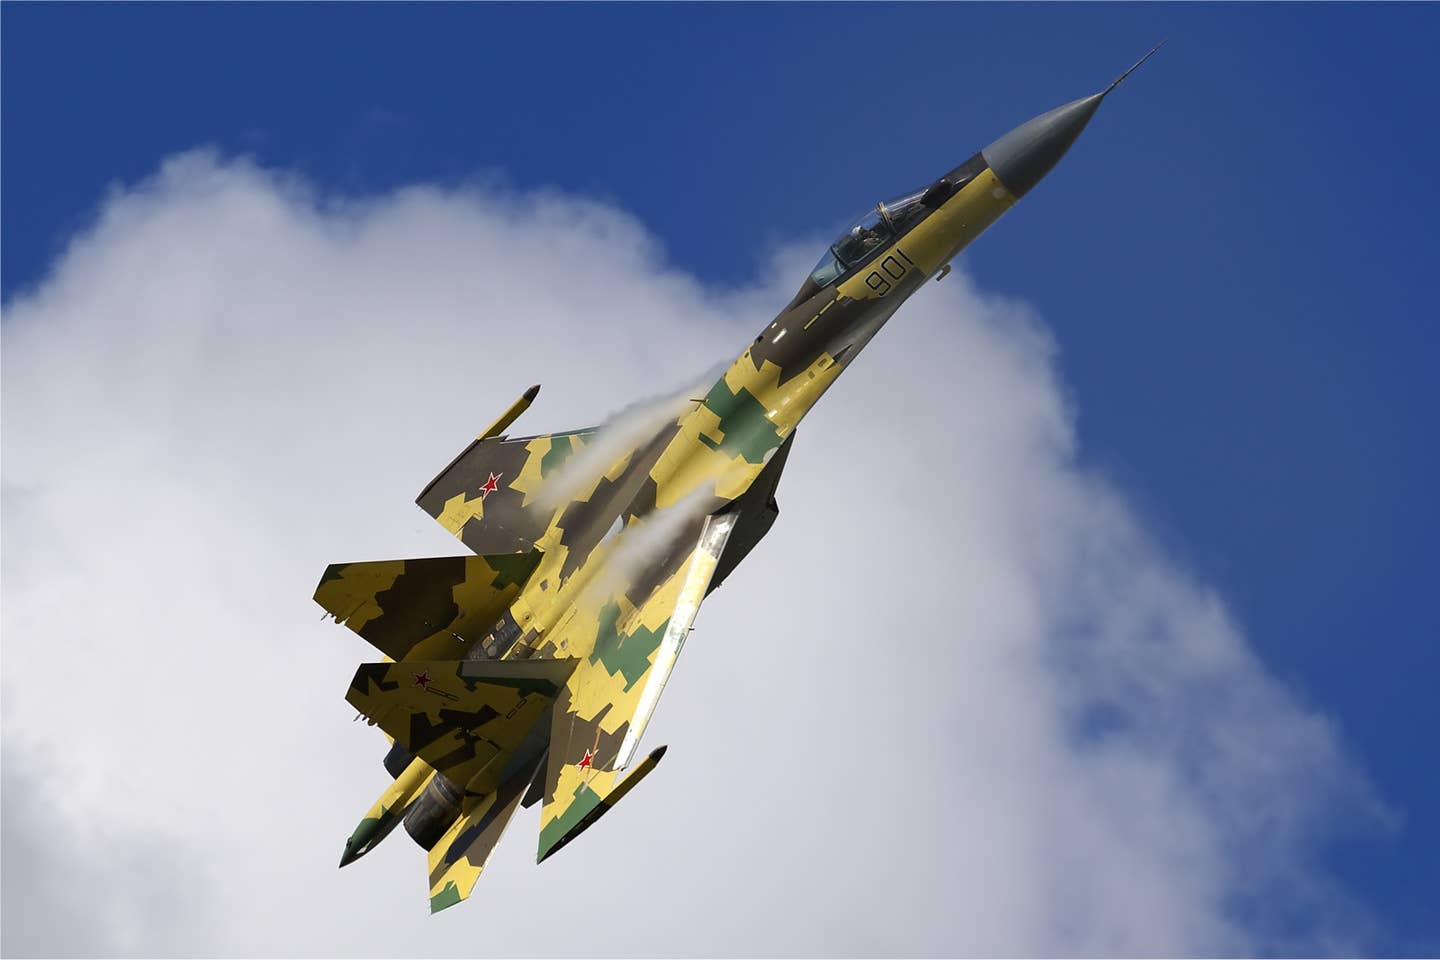 A prototype Sukhoi Su-35 performing at the MAKS 2009 airshow in Moscow. <em>Oleg Belyakov via Wikimedia Commons</em>